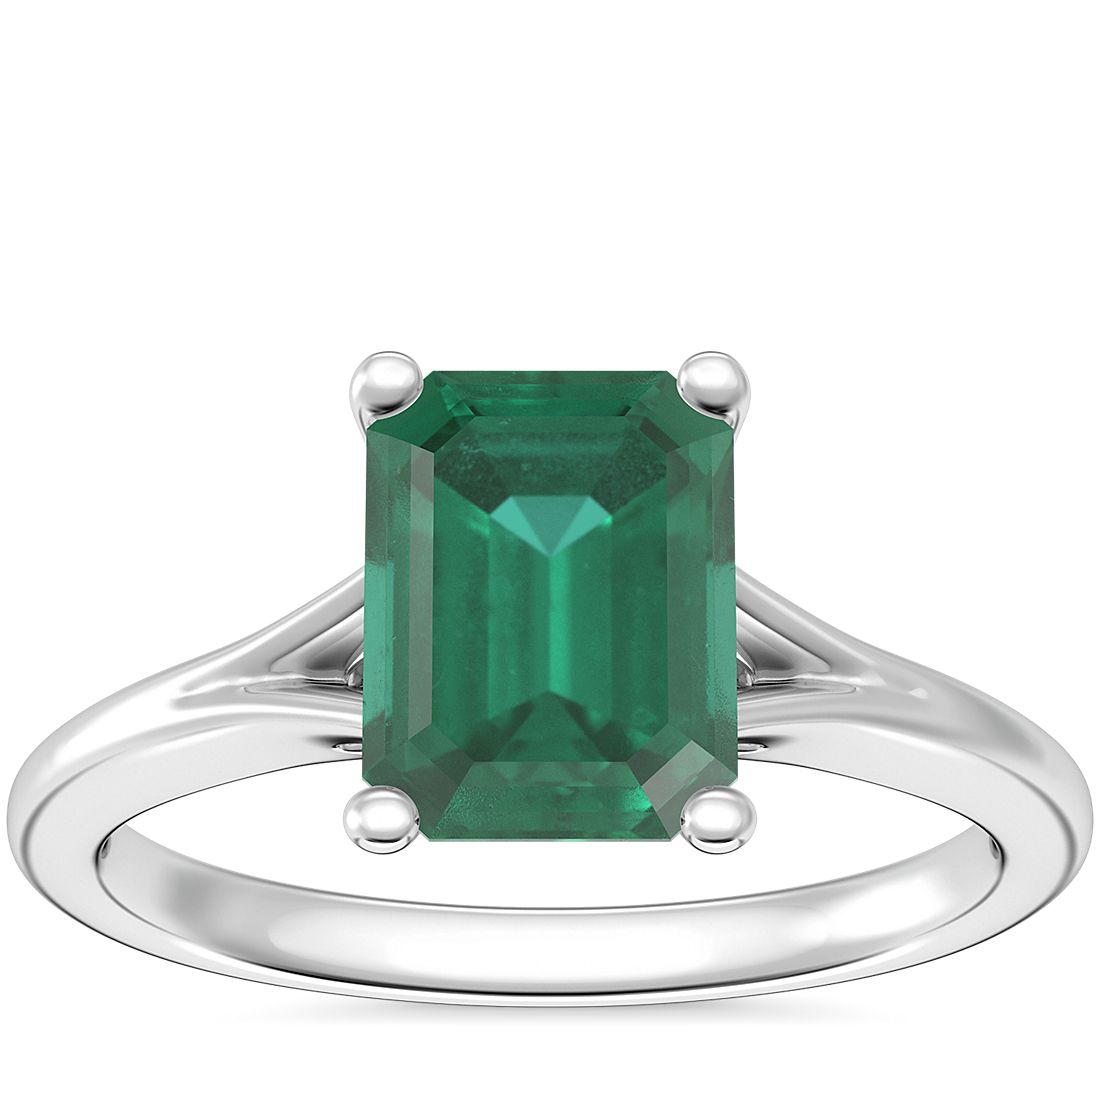 Petite Split Shank Solitaire Engagement Ring with Emerald-Cut Emerald in 18k White Gold (8x6mm)